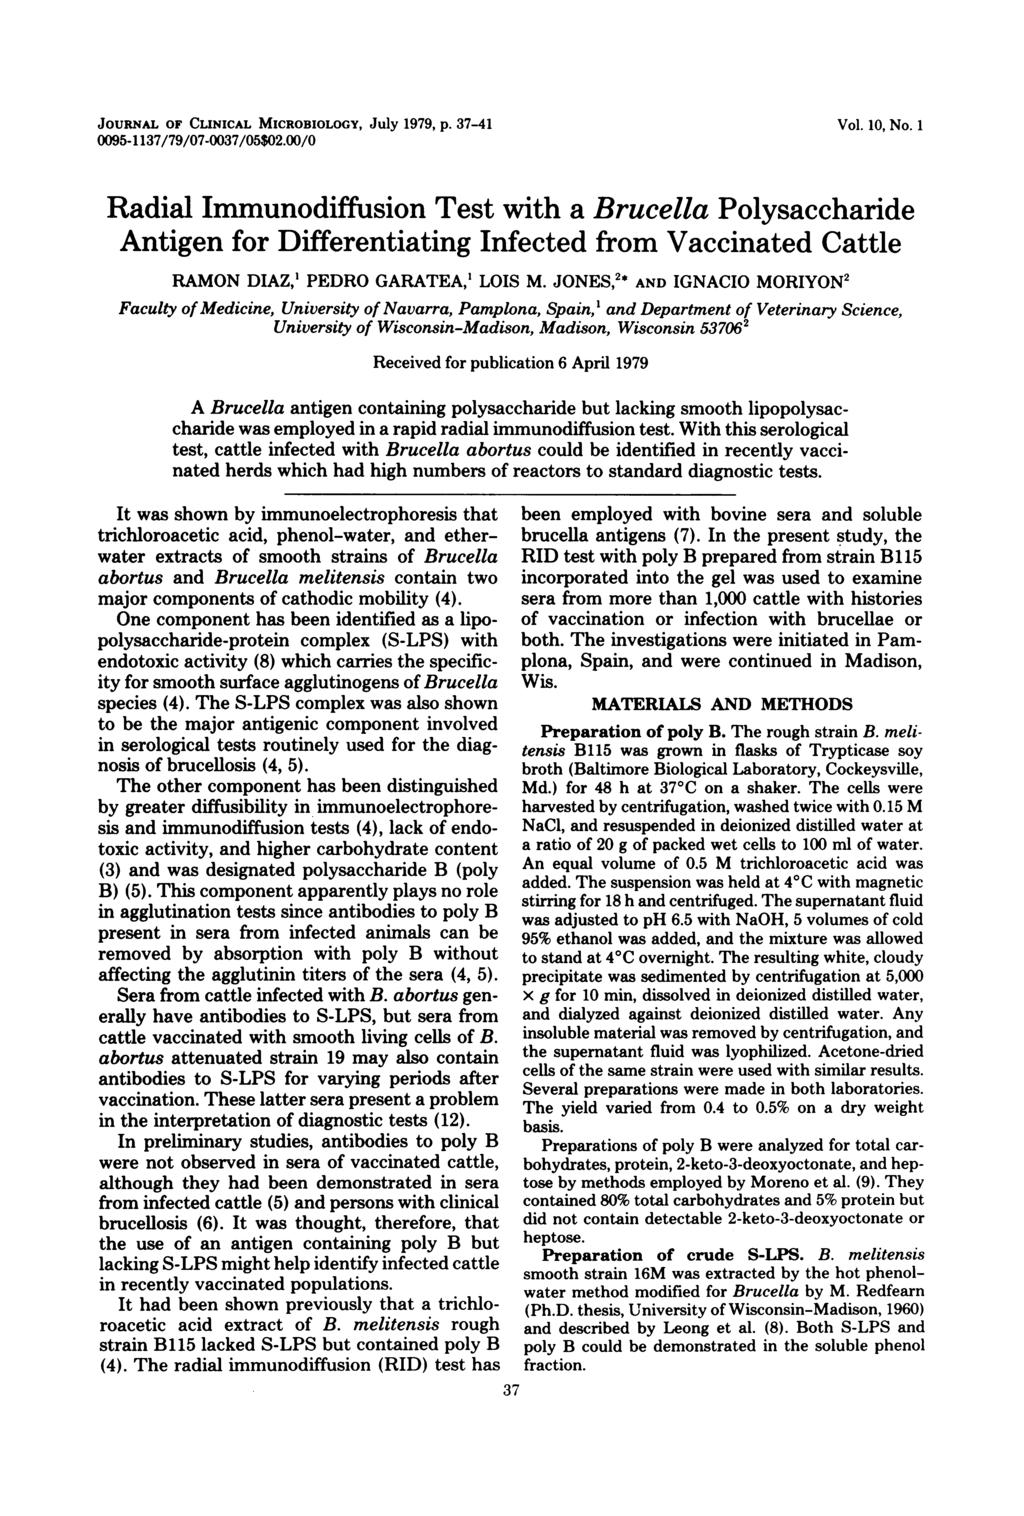 JOURNAL OF CLINICAL MICROBIOLOGY, July 1979, p. 37-41 0095-1137/79/07-0037/05$02.00/0 Vol. 10, No.